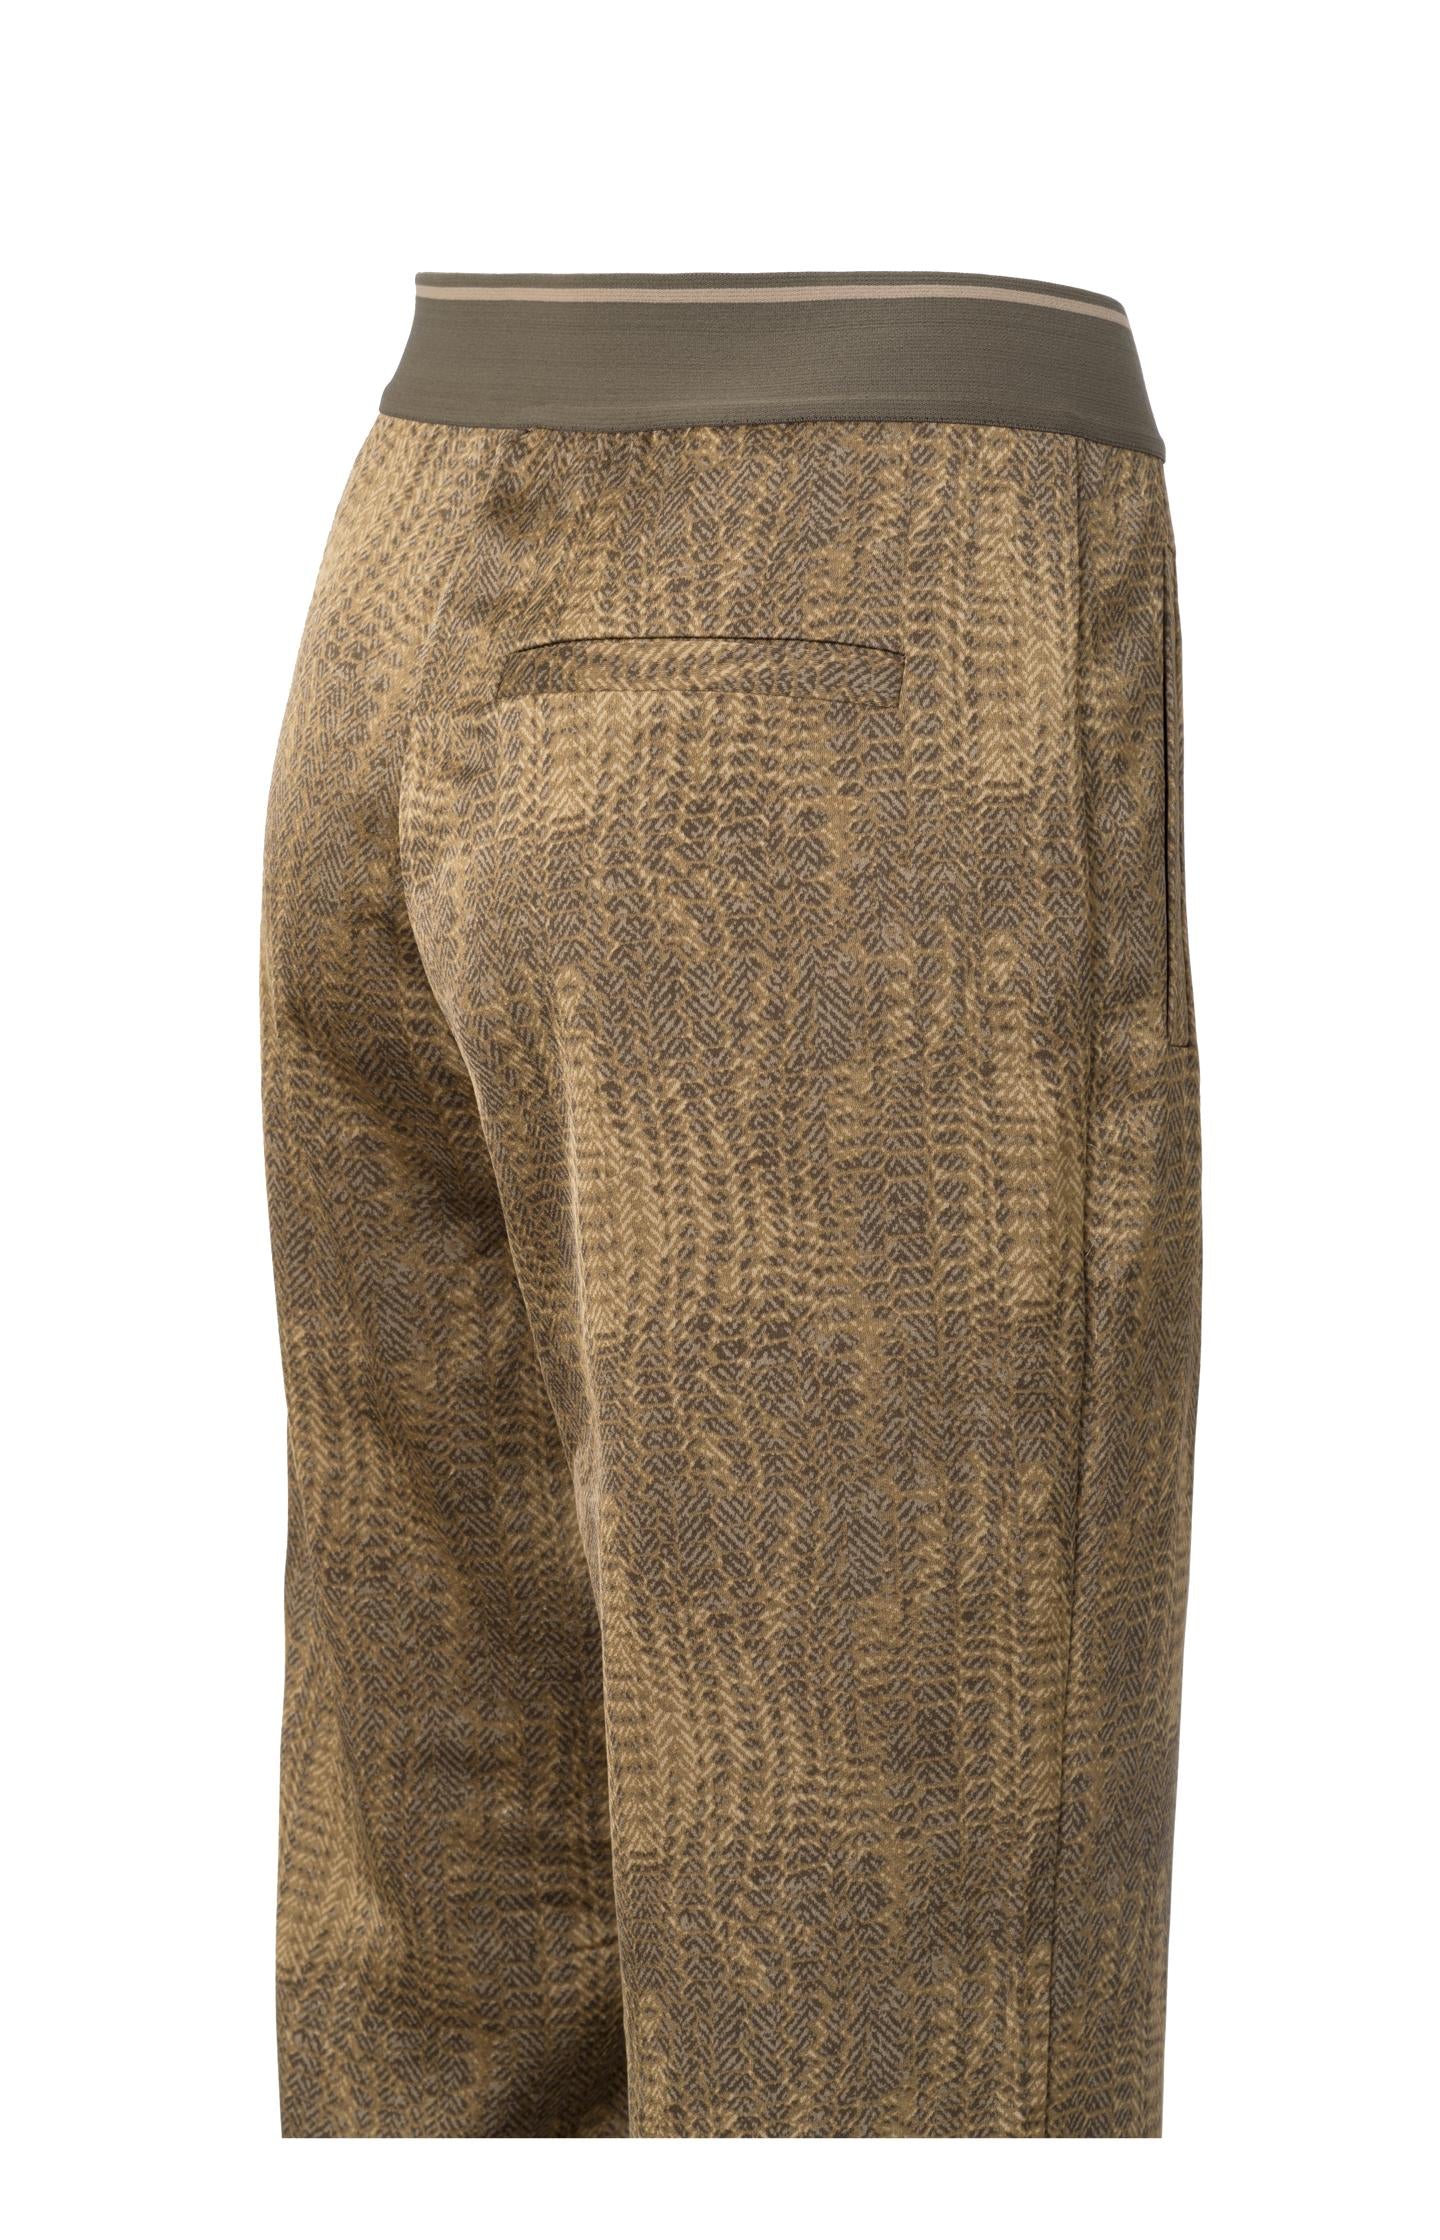 Wide leg trousers with pockets, zip fly and snake print